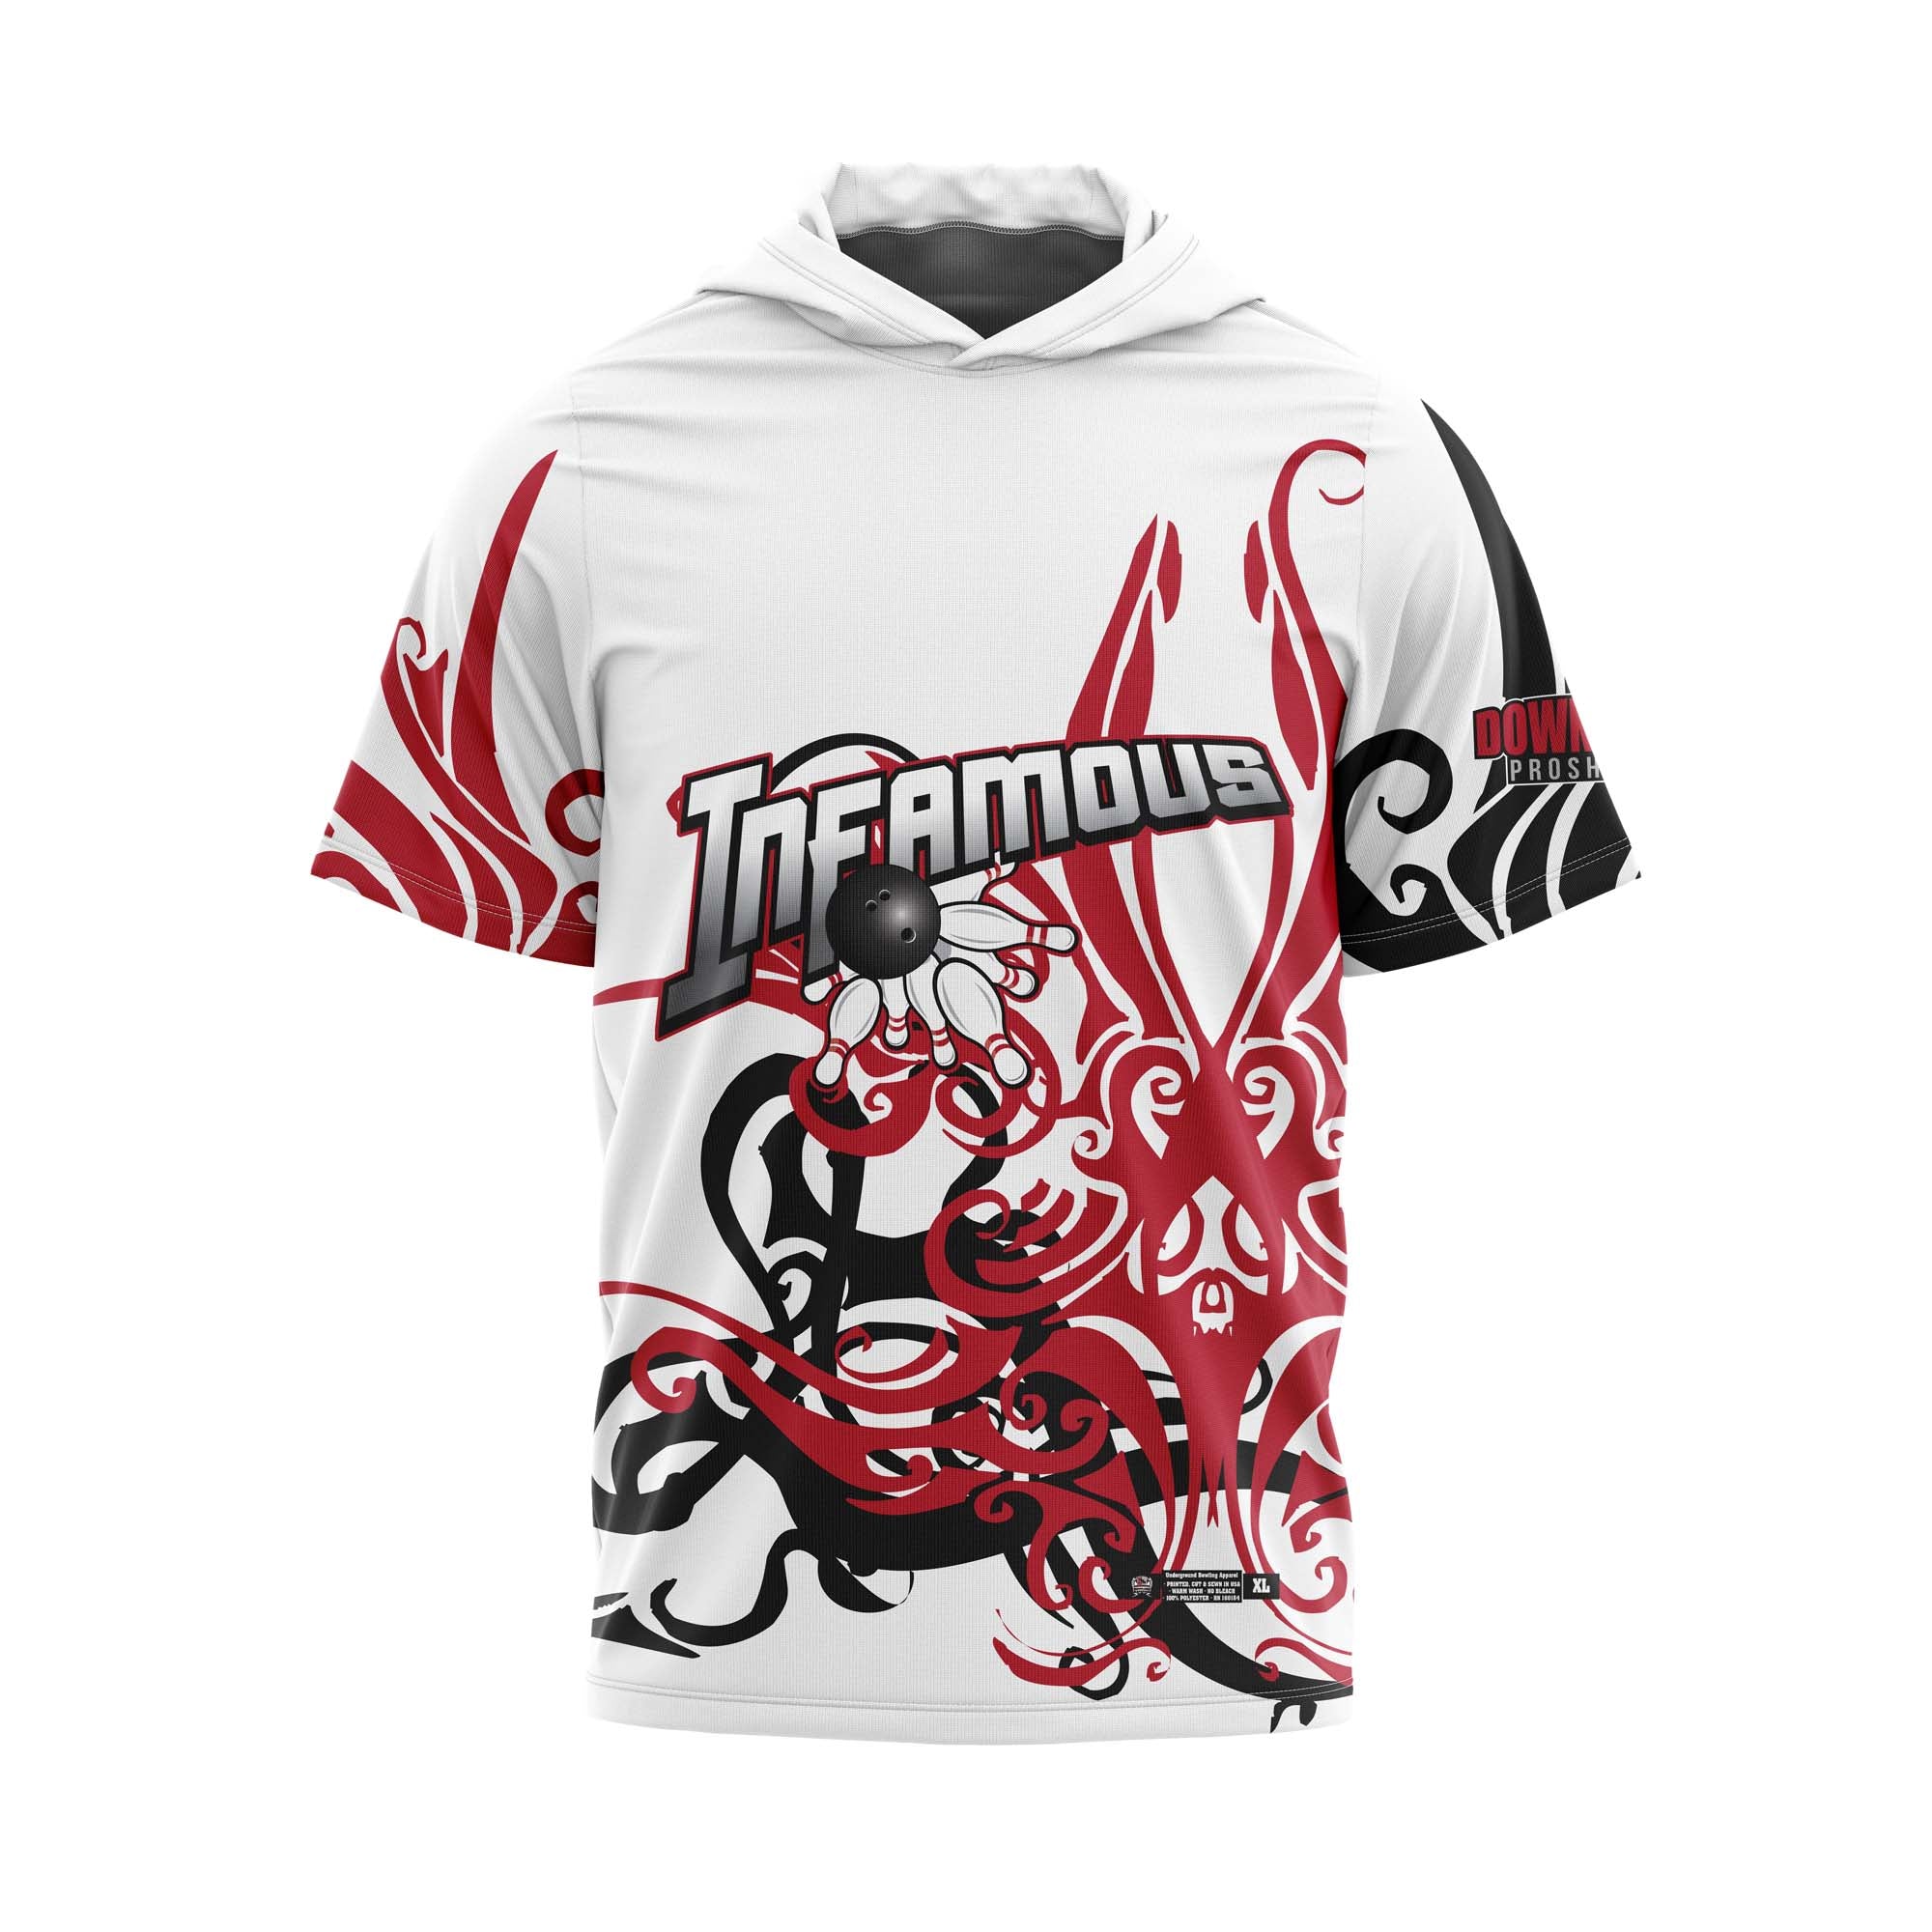 Infamous Tribal White Jersey